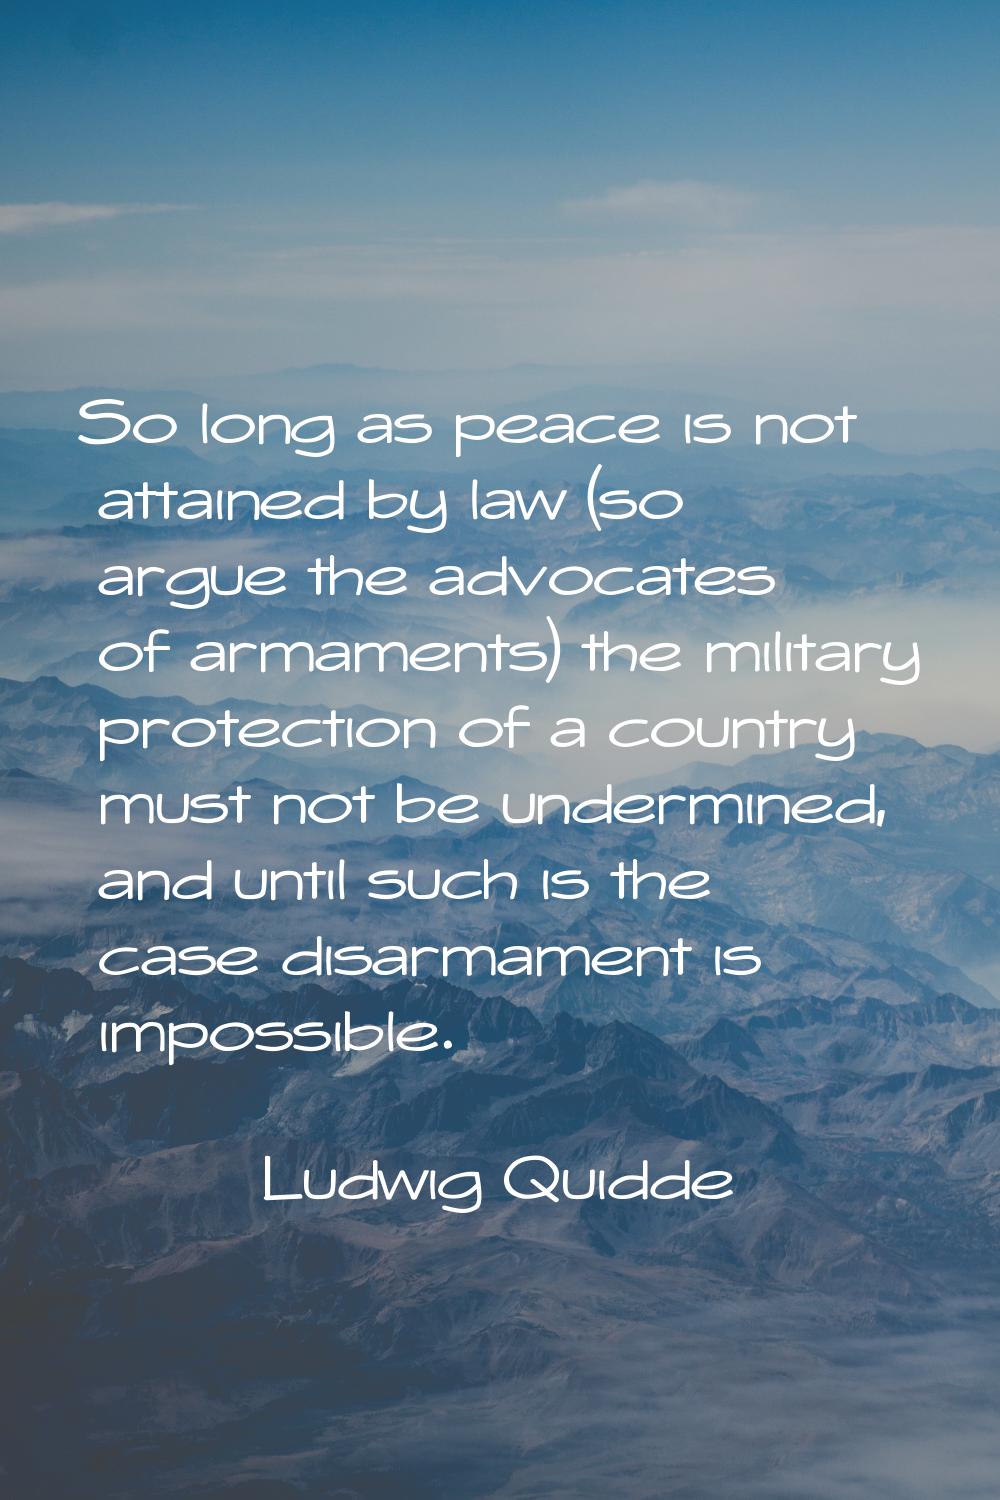 So long as peace is not attained by law (so argue the advocates of armaments) the military protecti